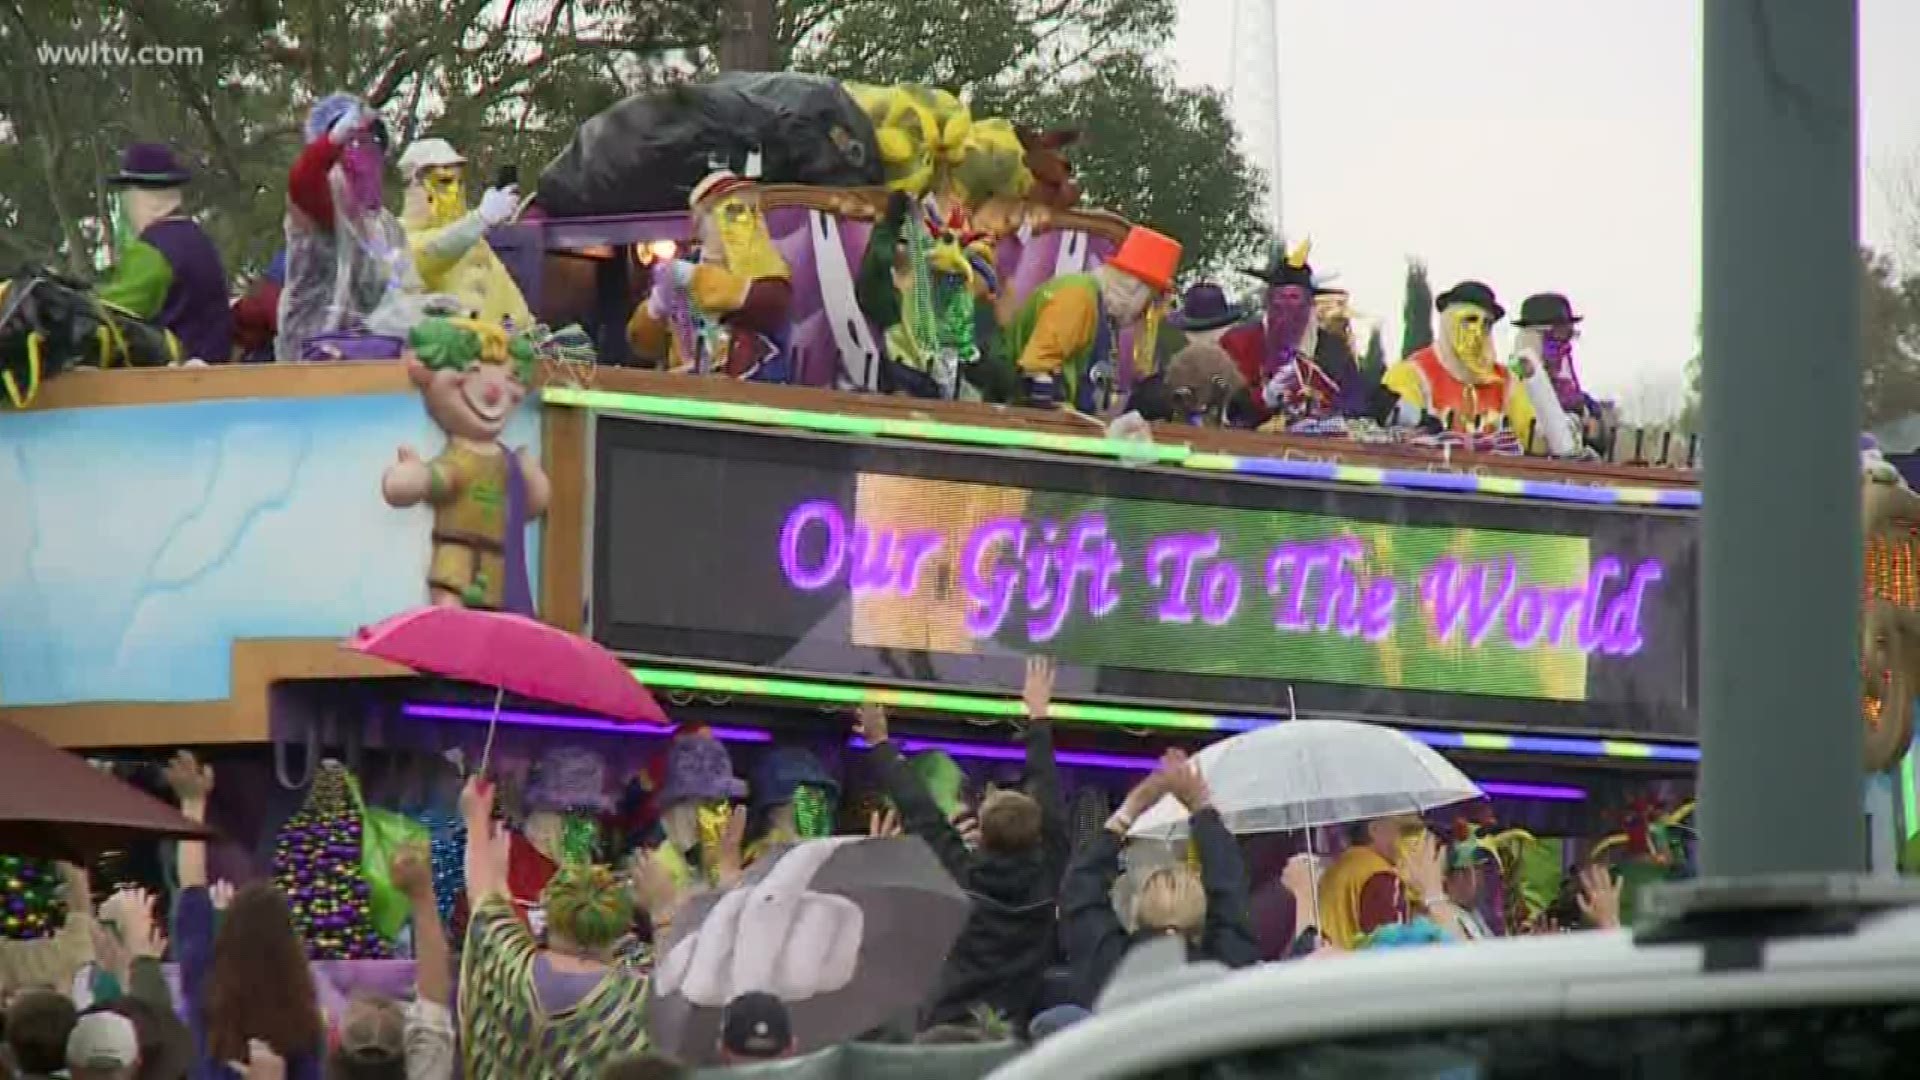 City leaders and krewe captains will be meeting to discuss possible changes to make parading safer in 2021.